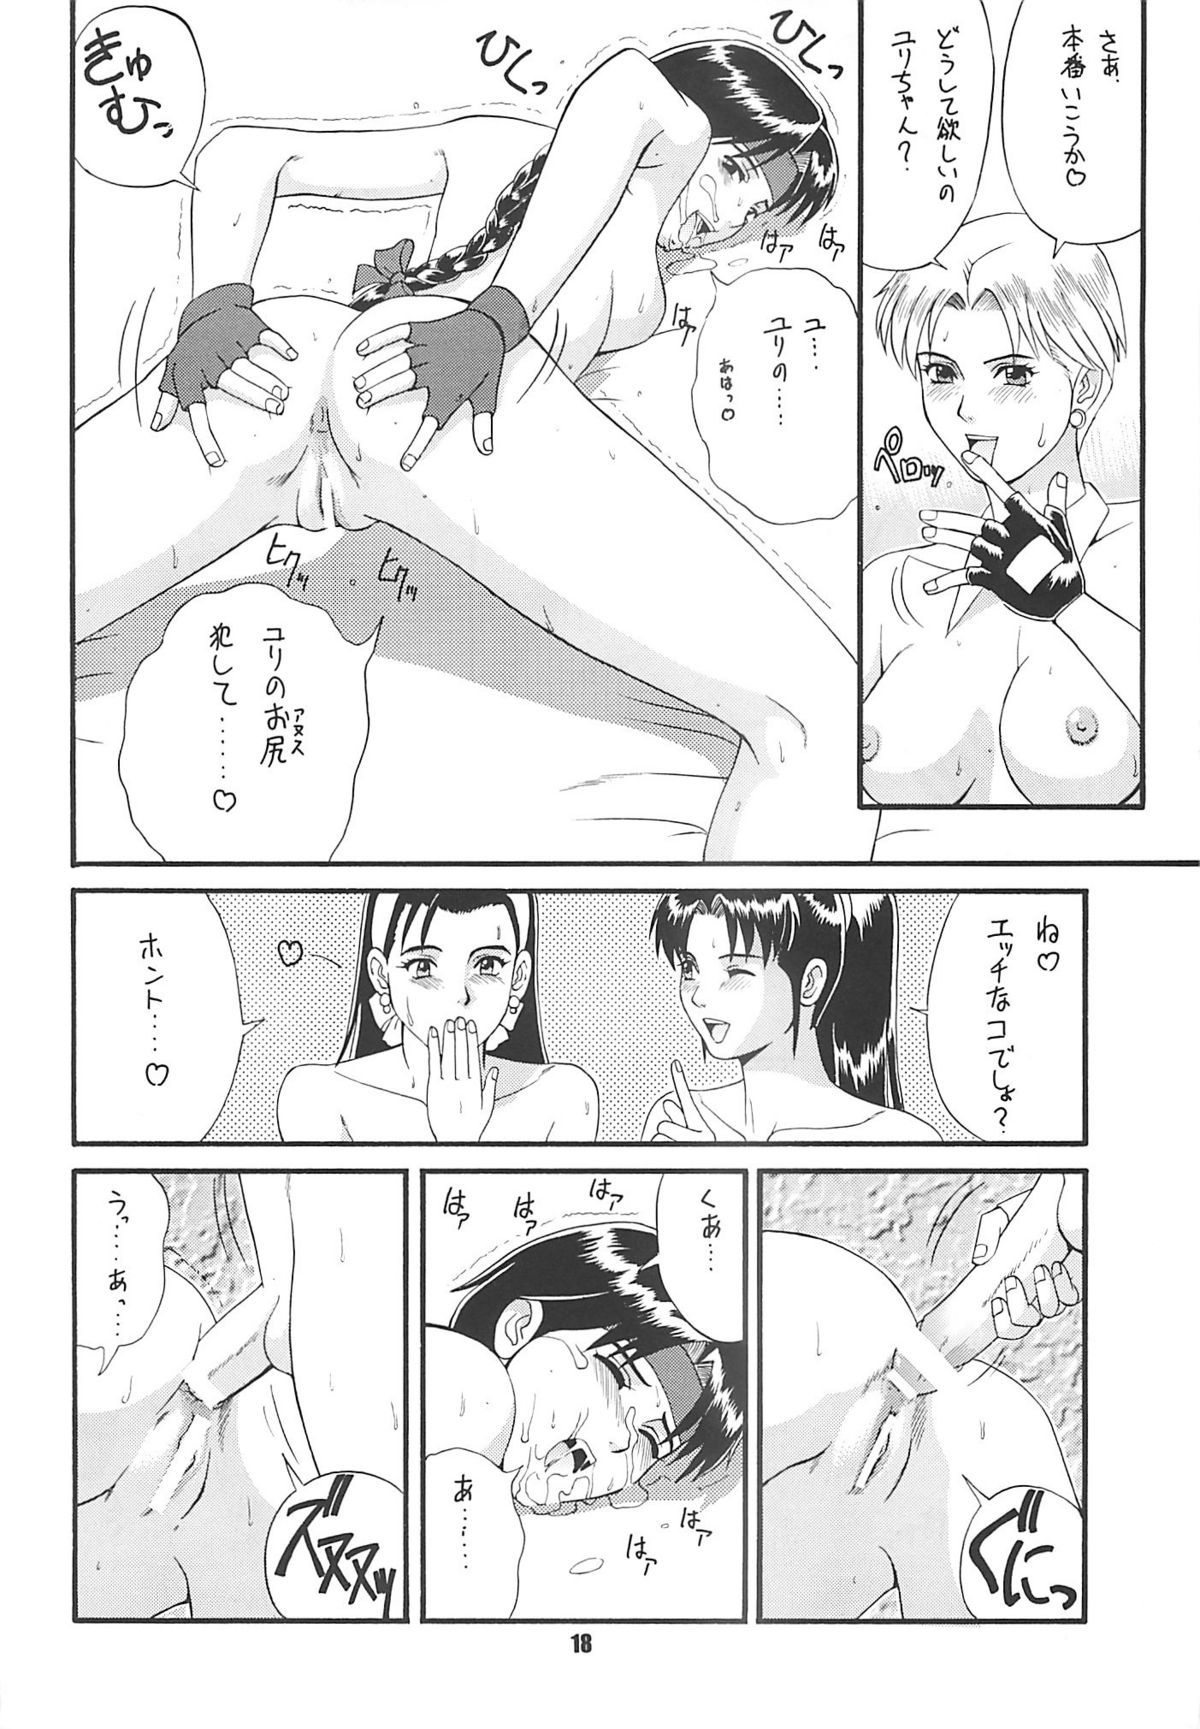 (CR22) [Saigado (Ishoku Dougen)] The Yuri & Friends '97 (King of Fighters) page 17 full